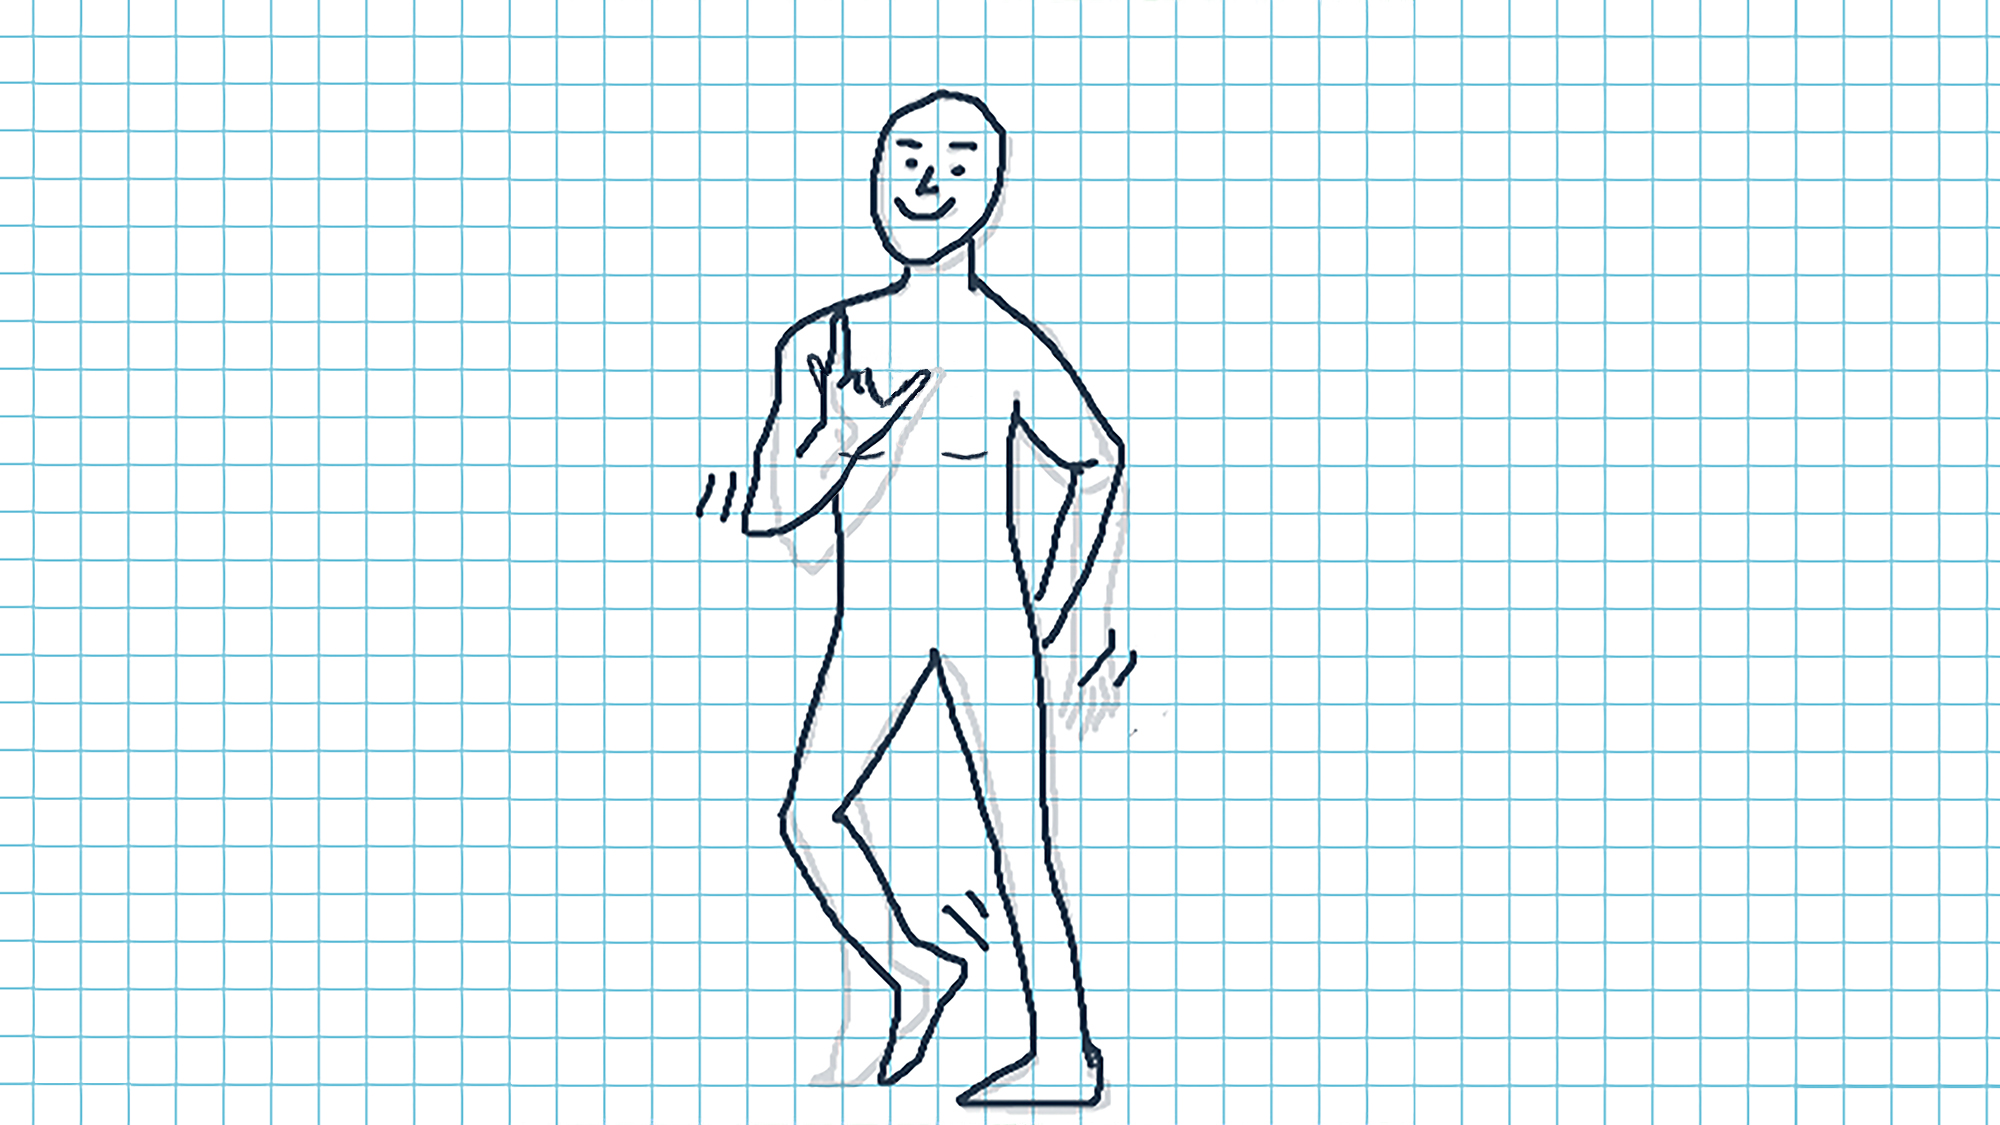 The image shows a sketch of a standing person doing a rock'n'roll gesture. Its left hand is hidden behind her back, one leg is in movement. Strokes around the figure emphasize the motion.